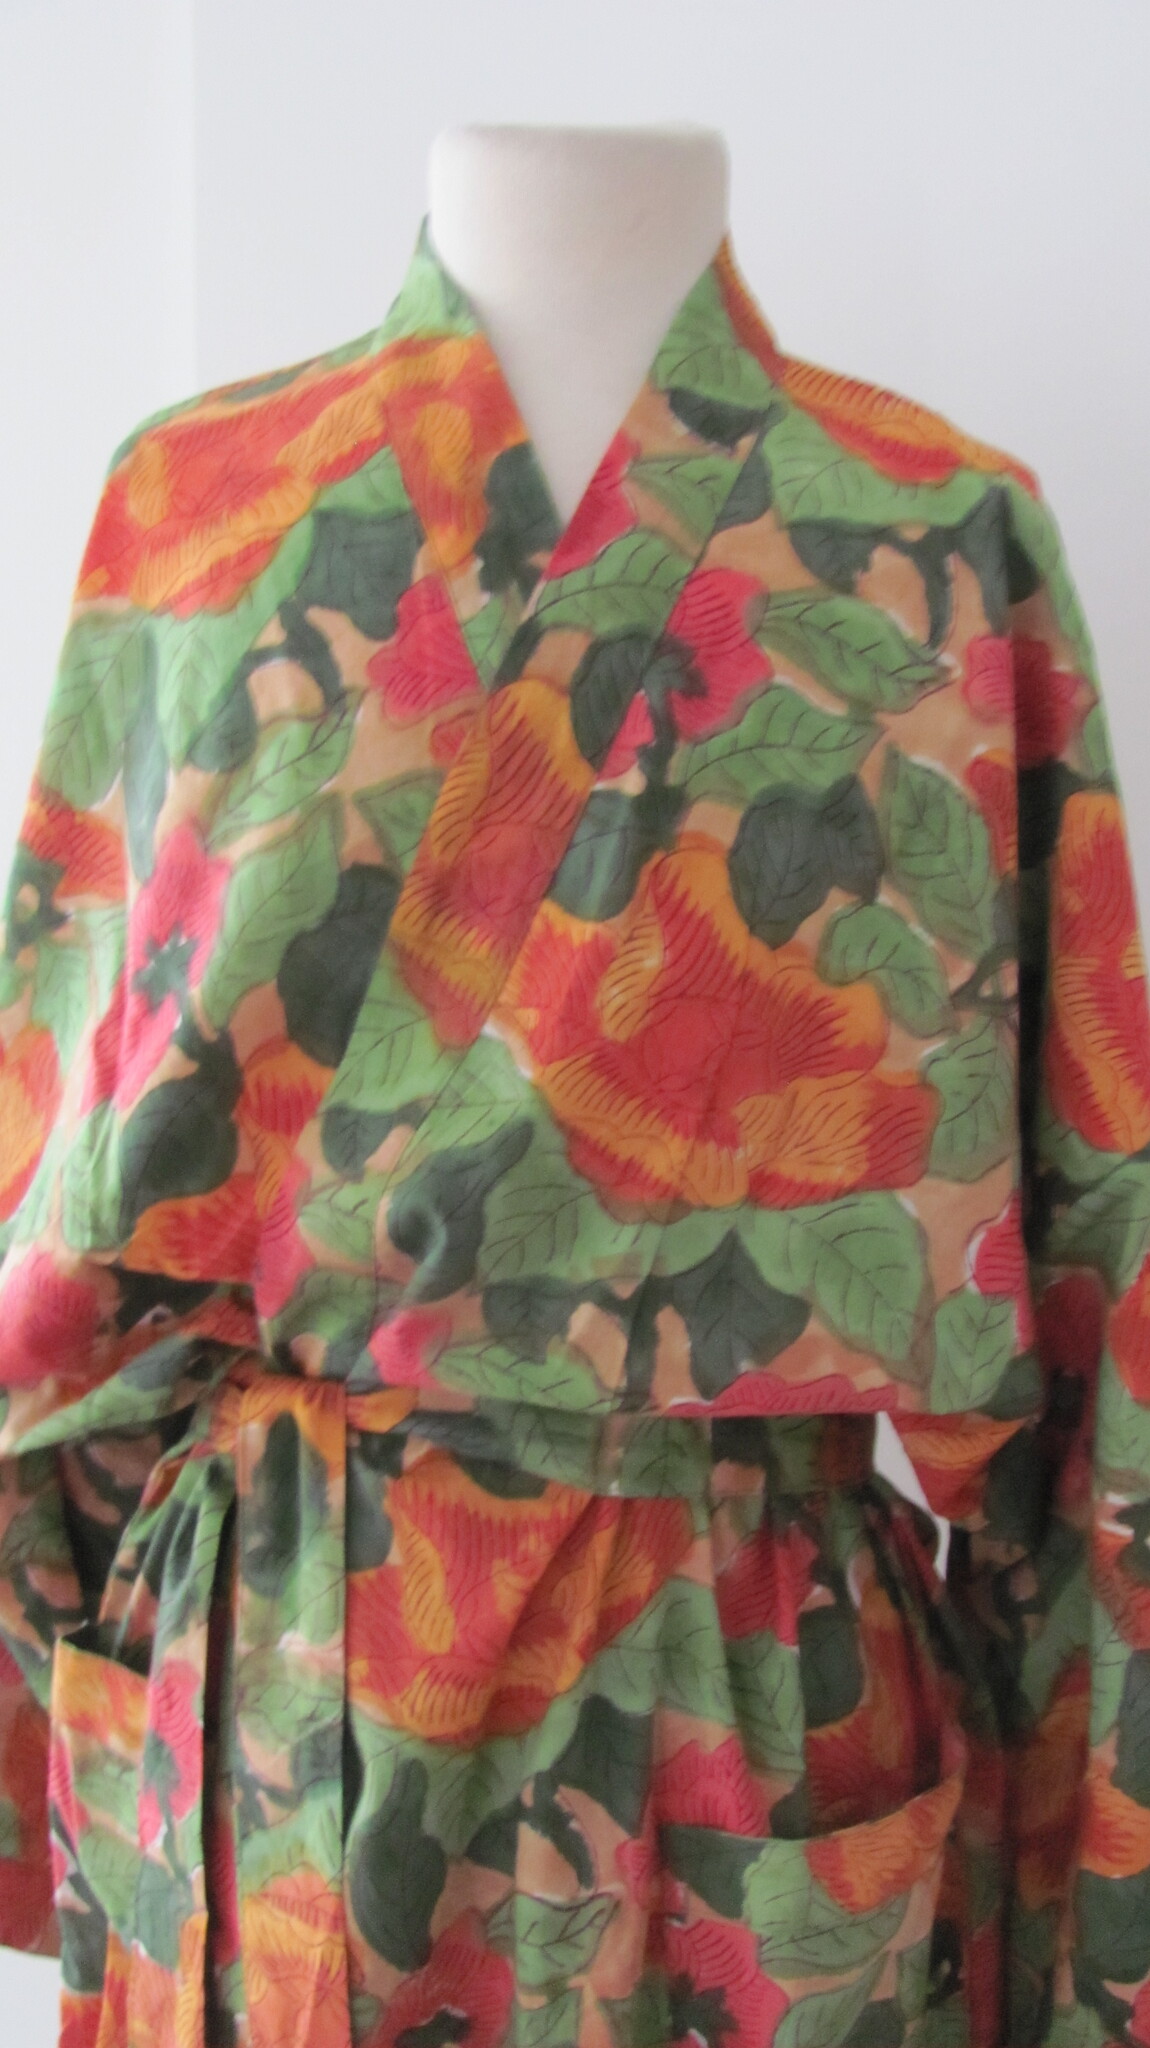 Kimono, dressing gown hand printed with vegetable dyes. 100% cotton